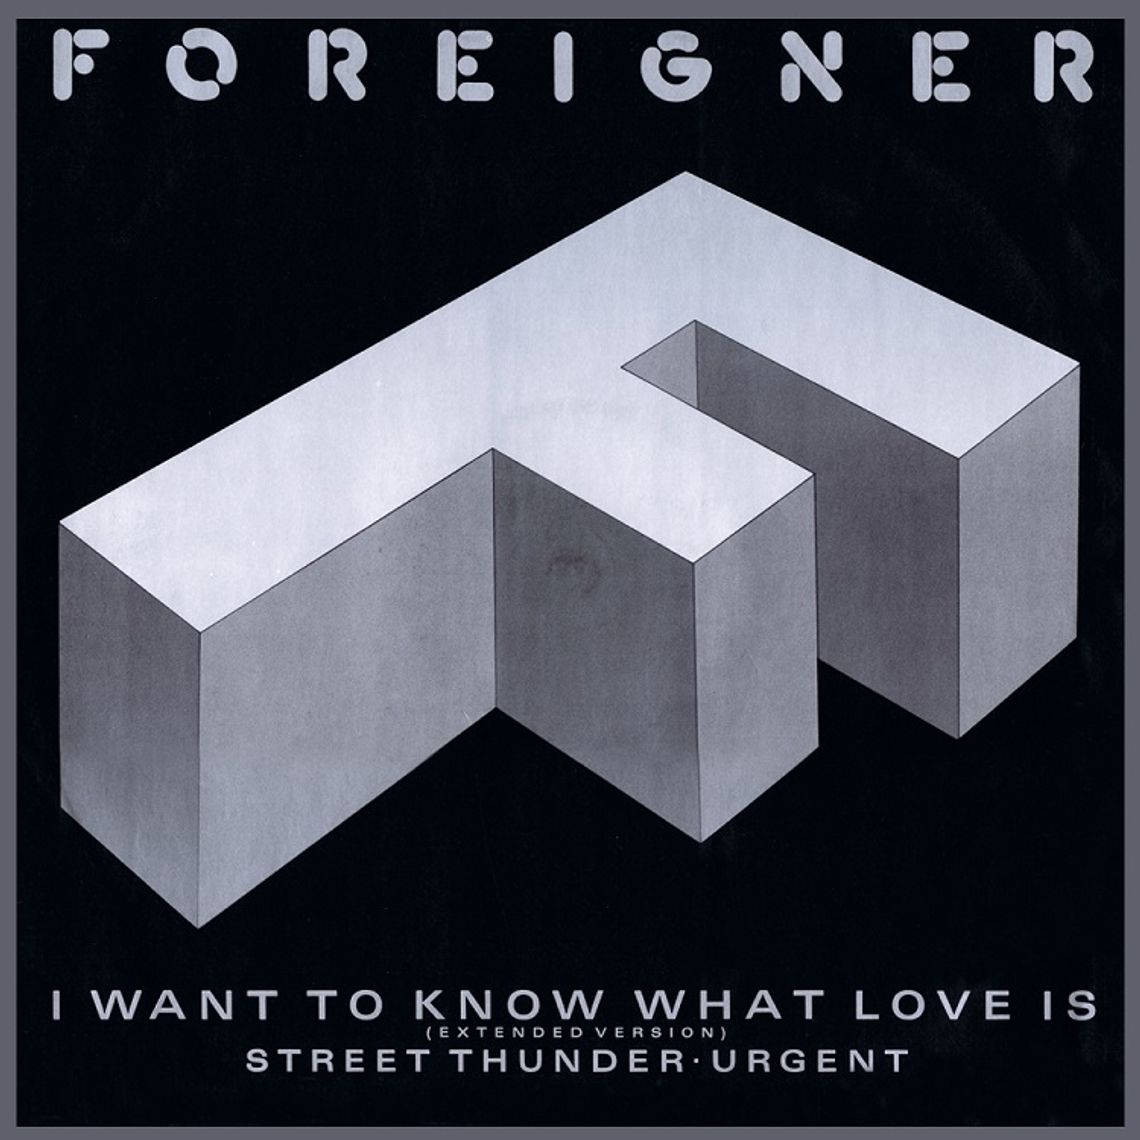 FOREIGNER "I want to know what love is"